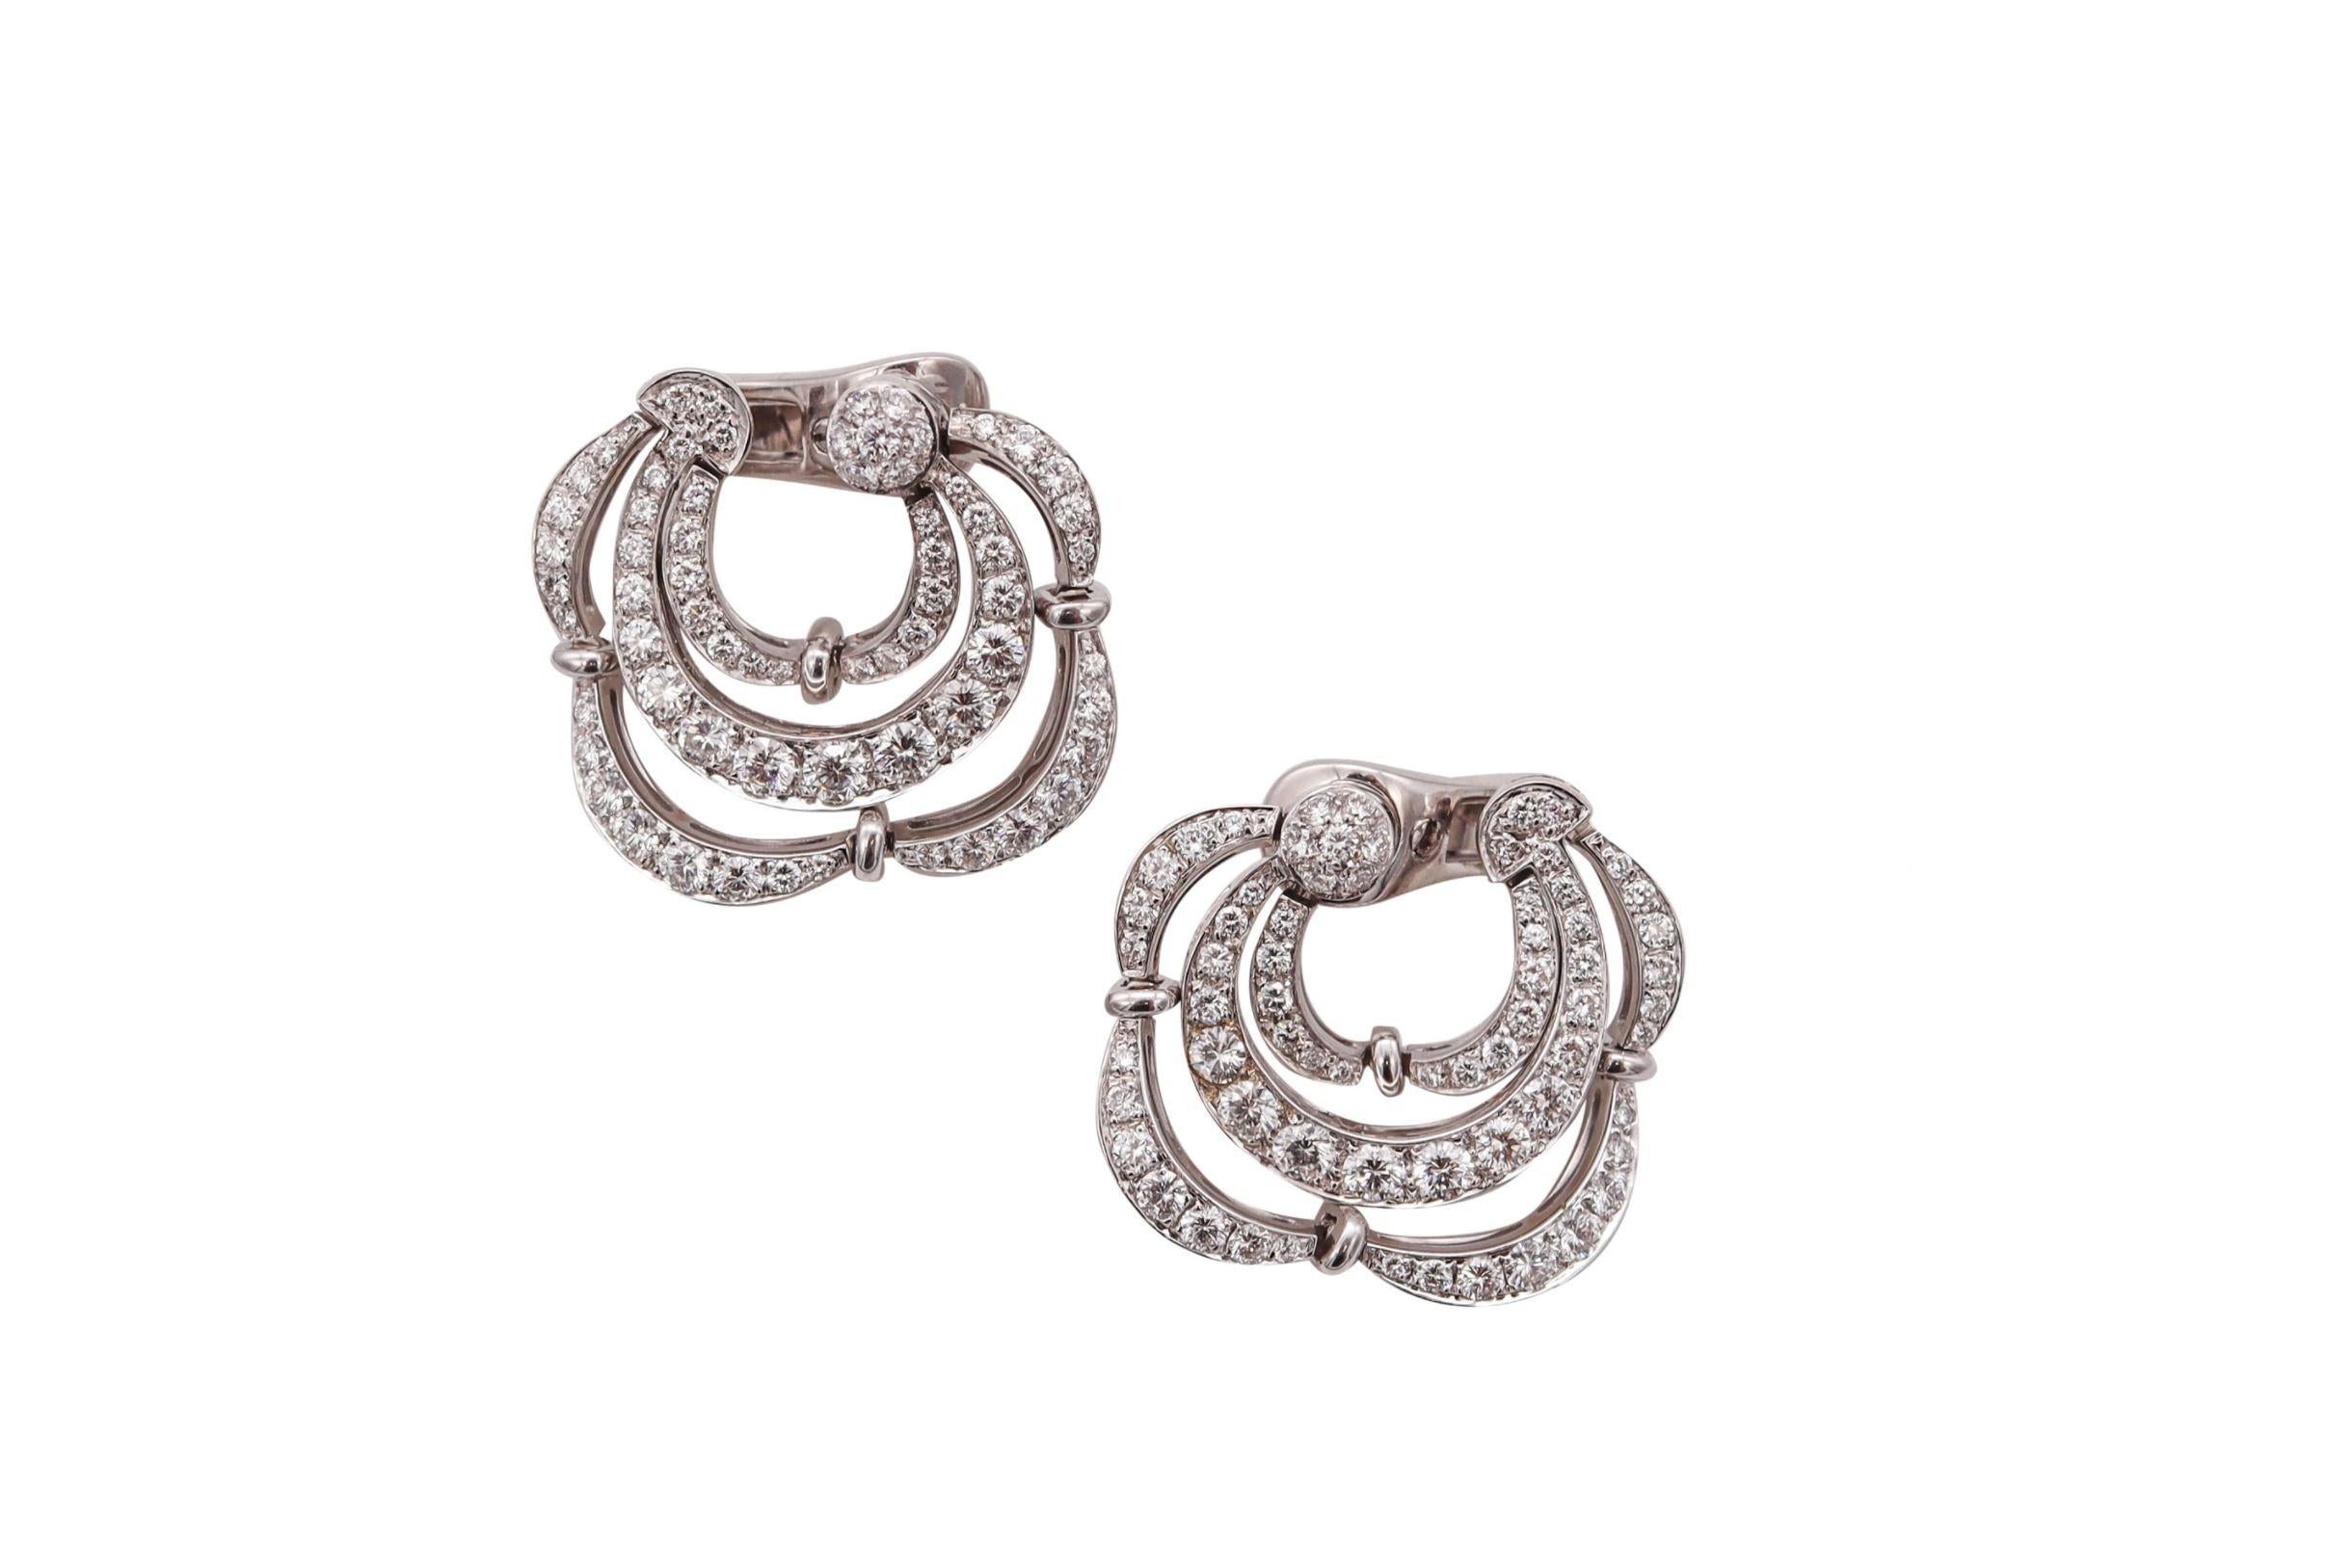 Modern Bvlgari Roma Clips Earrings in 18 Kt White Gold with 5.76 Cts in VS Diamonds